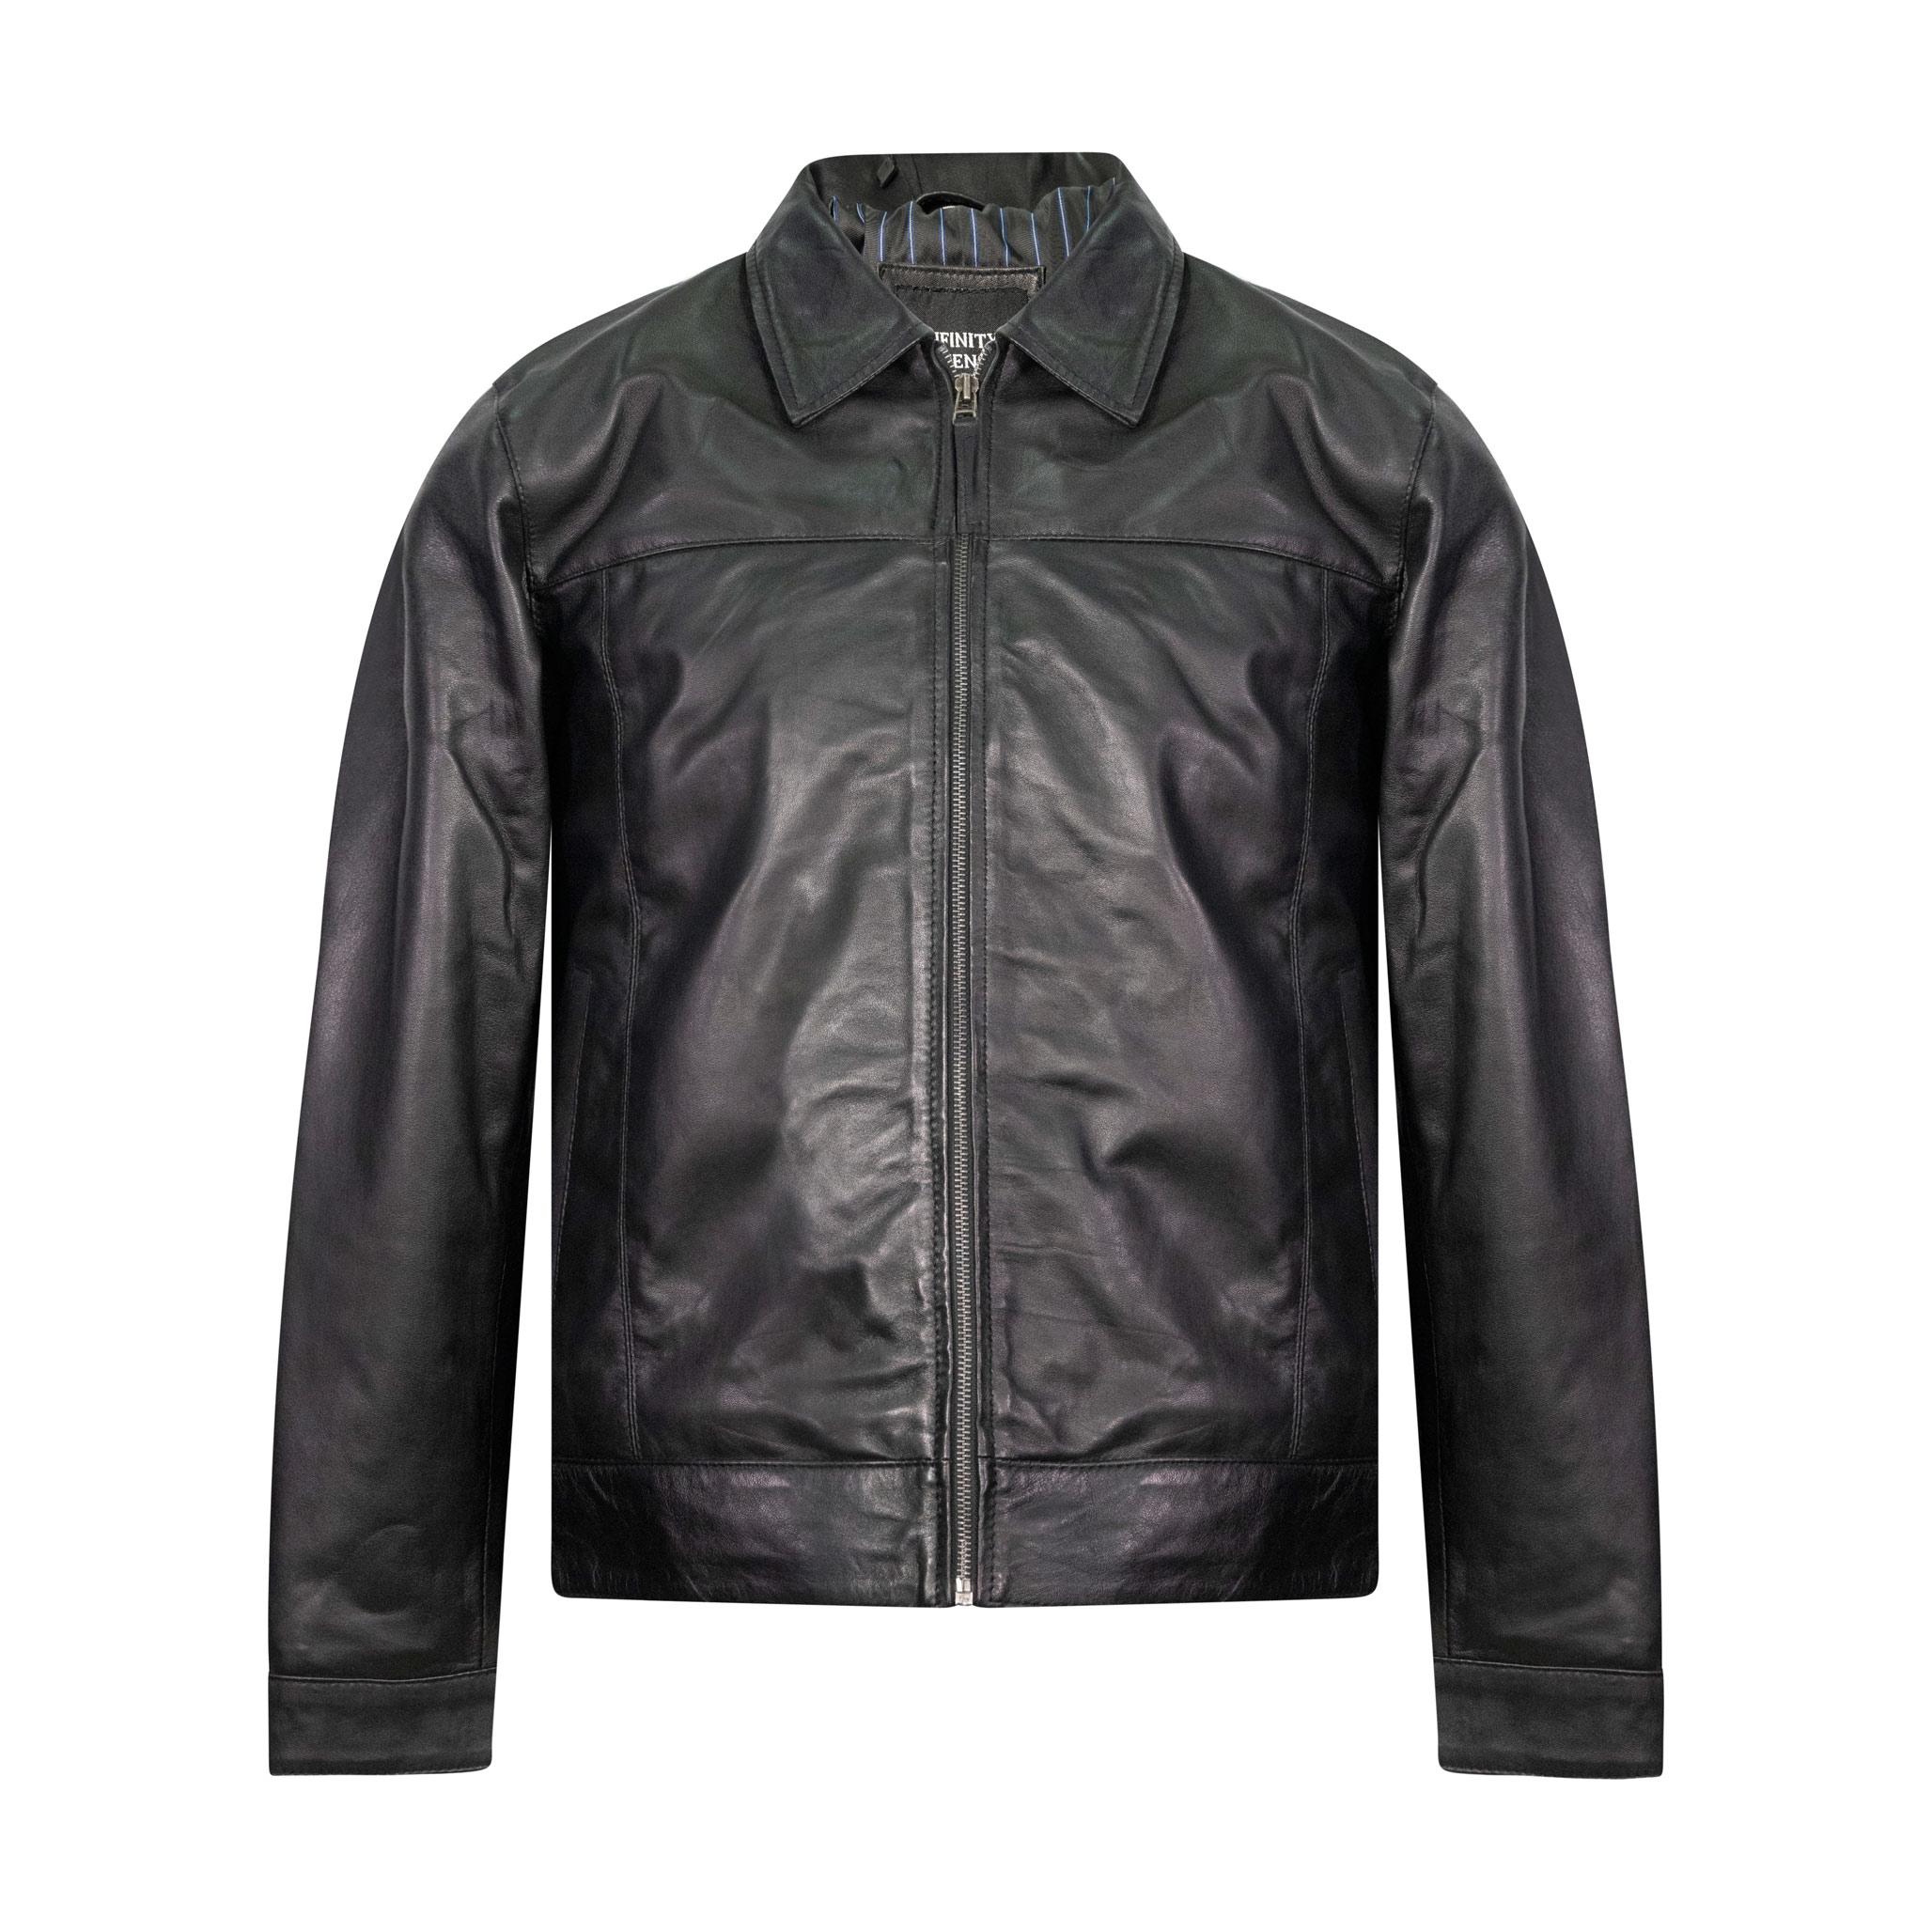 A beautiful black leather jacket, without any external zips. Short length.